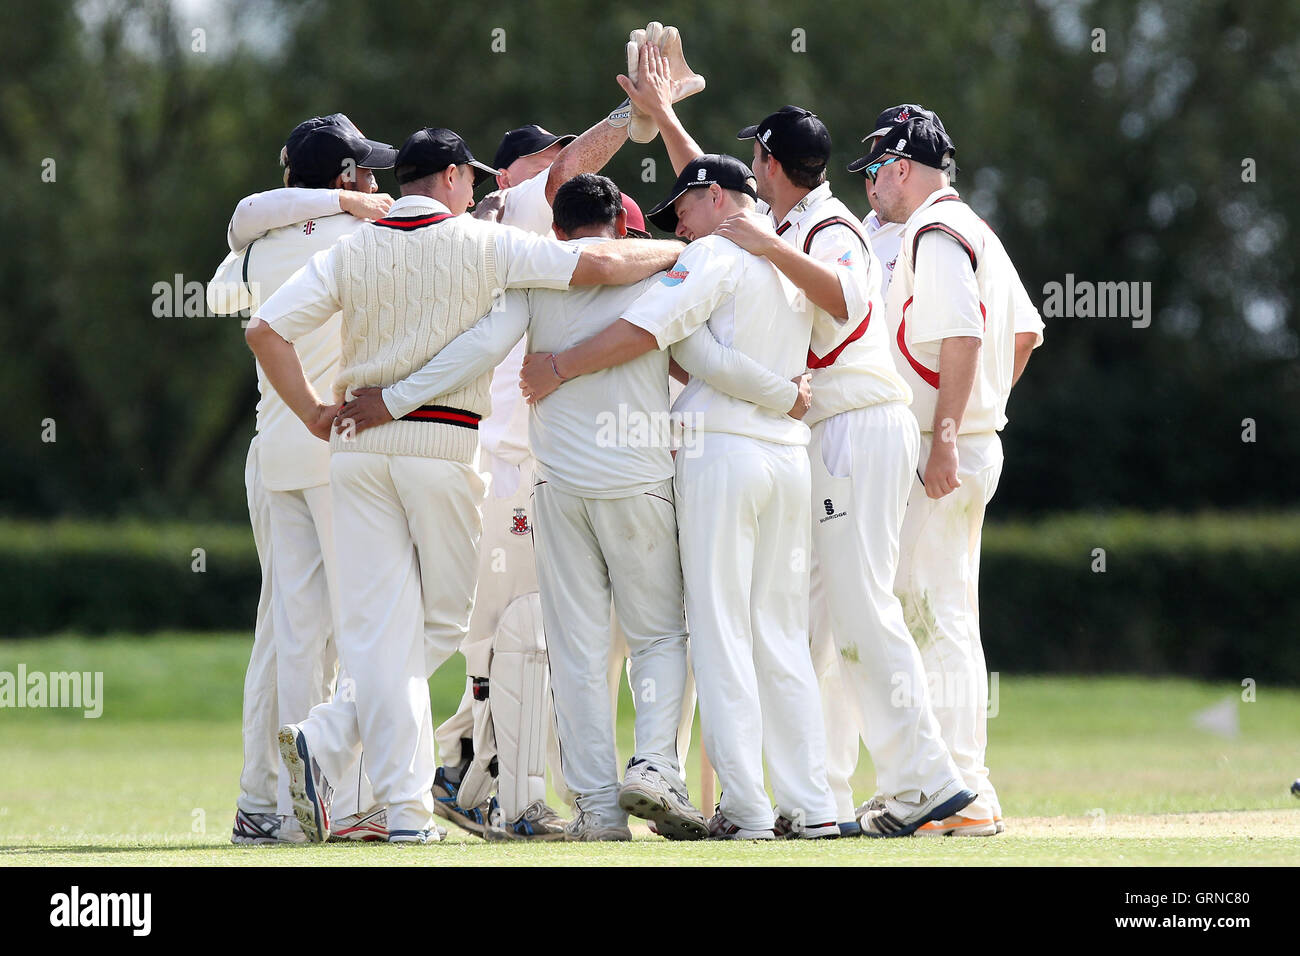 Hornchurch claim the seventh Horndon wicket - Horndon-on-the-Hill CC vs Hornchurch CC - Essex Cricket League - 23/08/14 Stock Photo